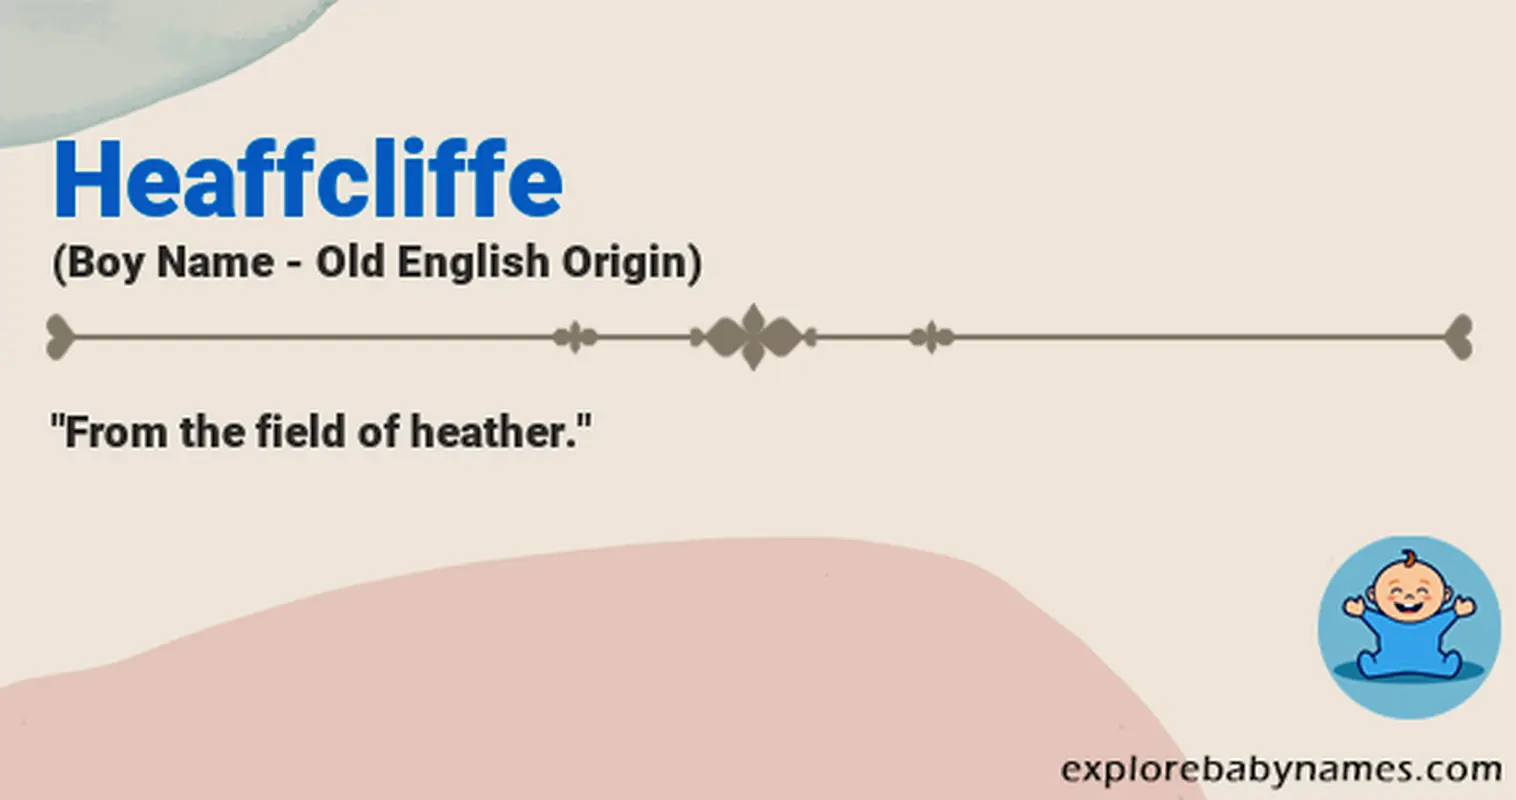 Meaning of Heaffcliffe